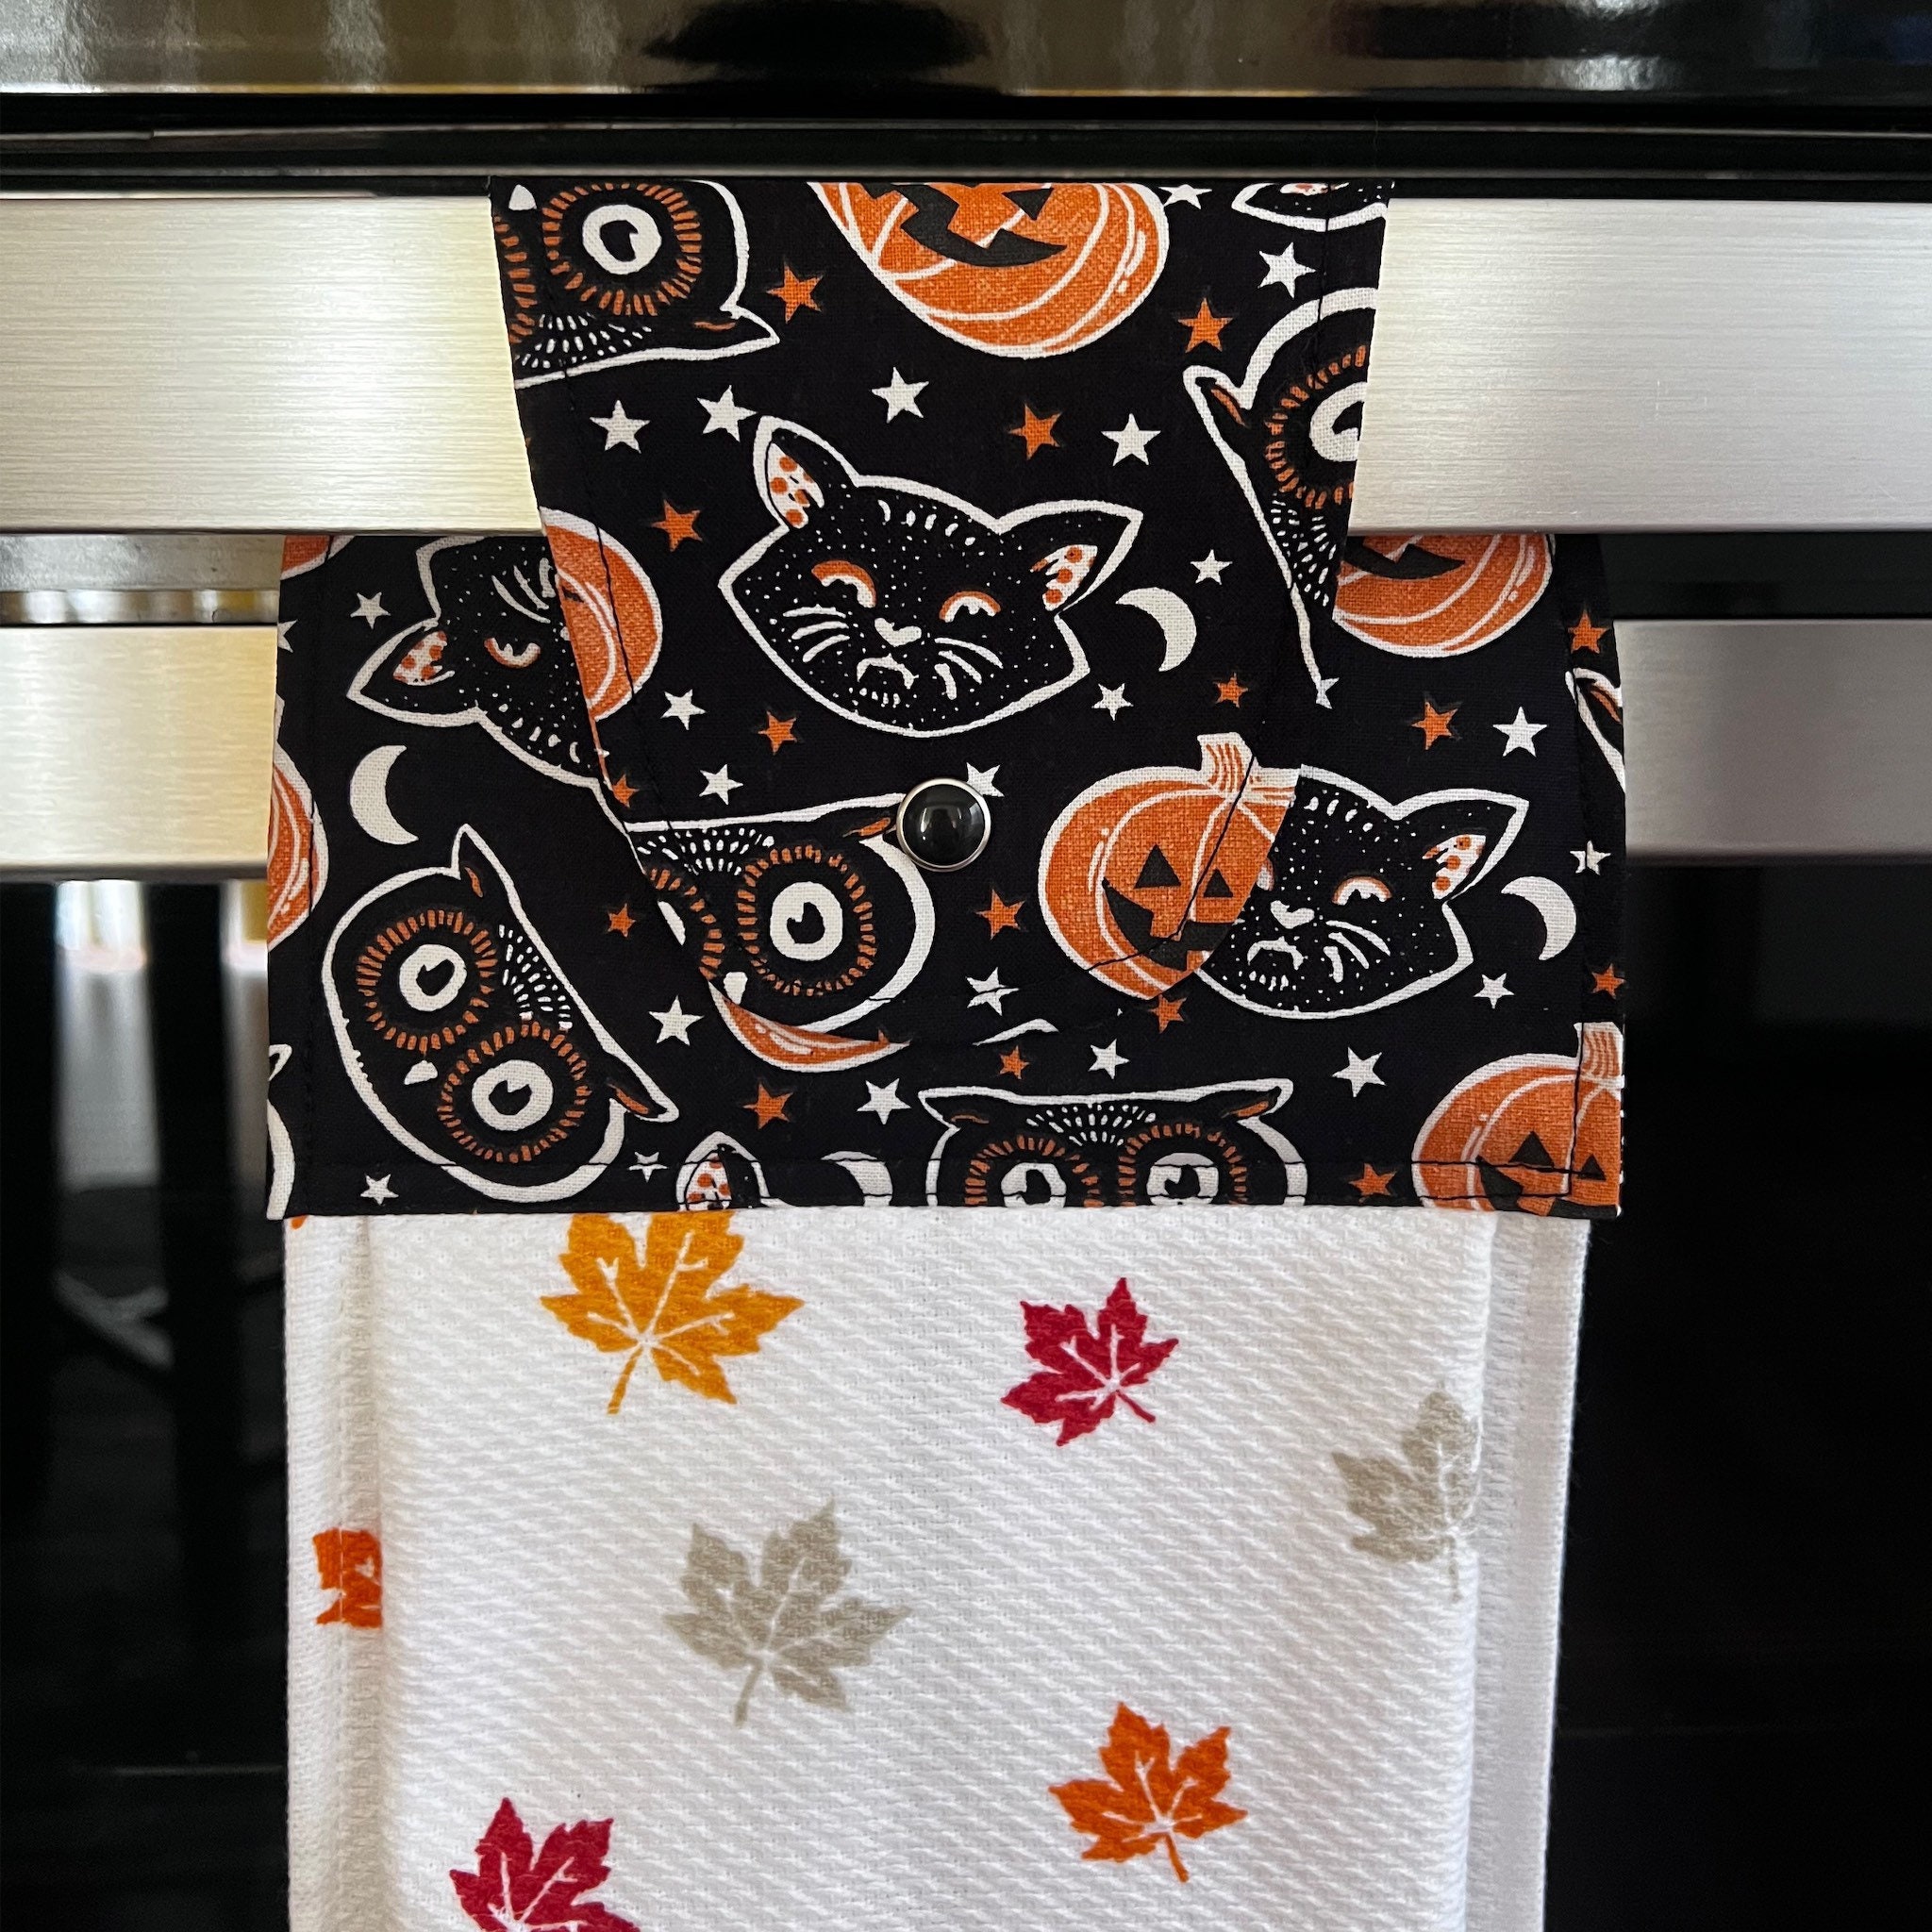 Fall Hanging Towel With Towel Topper, Dish Rag, Kitchen Hand Towel, Cotton  Dish Towel, Farmhouse Towel, Oven Door Towel, Fall Kitchen Towel 